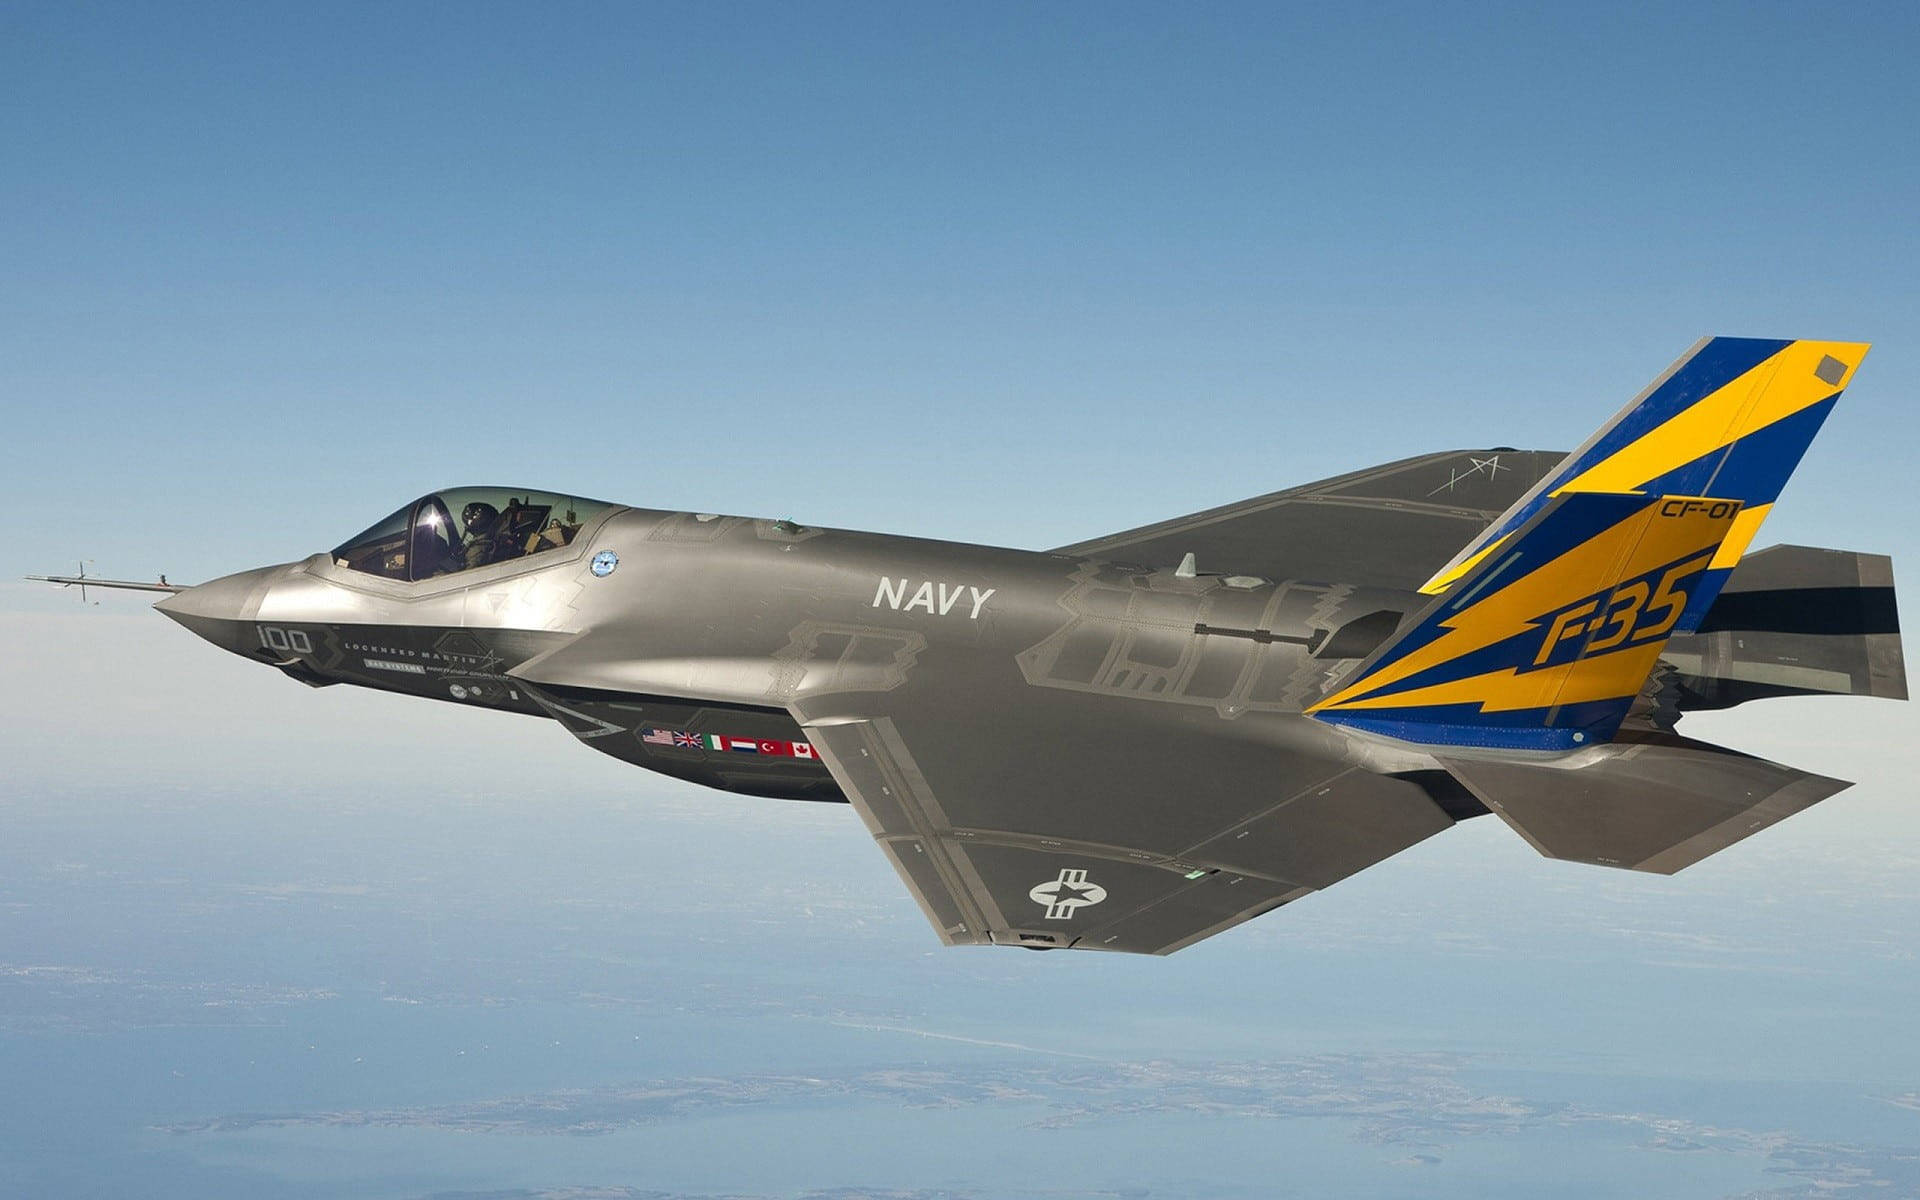 F-35c In The Sky Military Aircraft Desktop Wallpaper